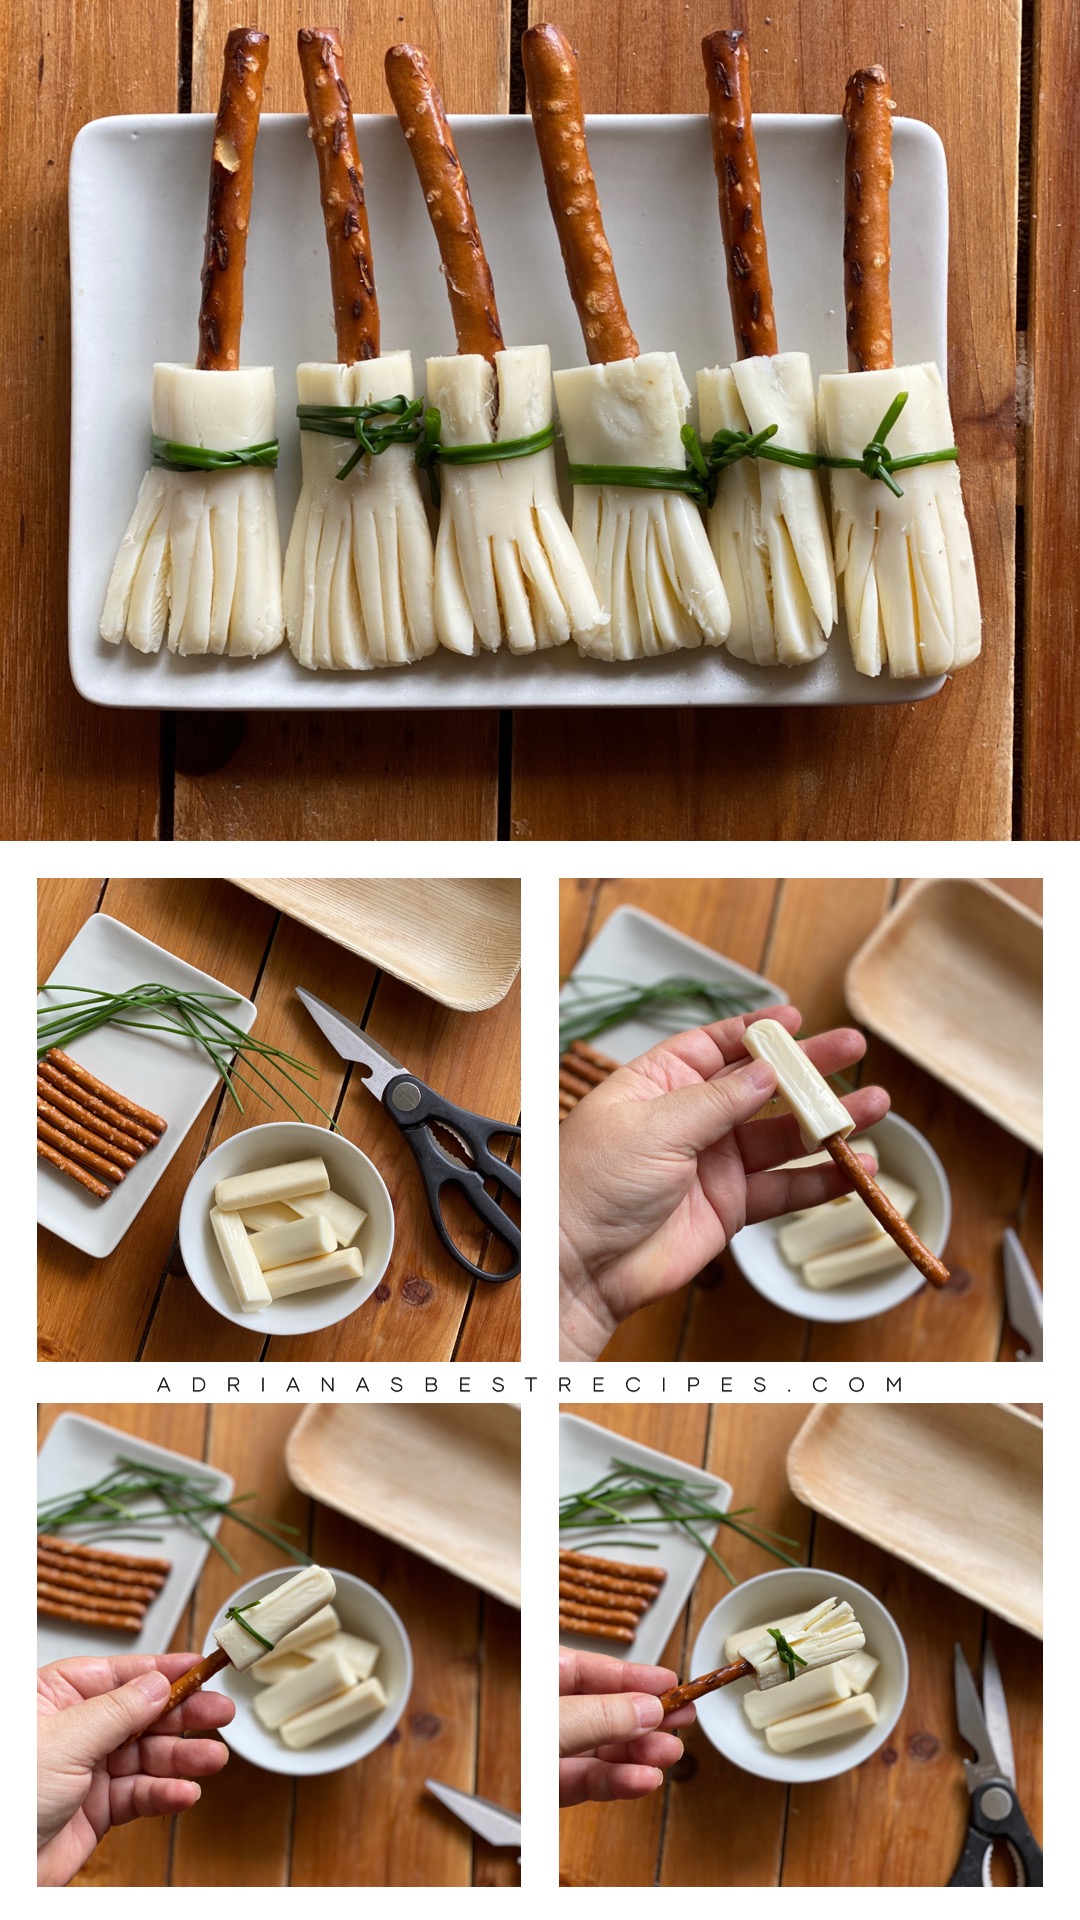 This is the step by step process on how to make cheesy brooms using string cheese, pretzels and chives